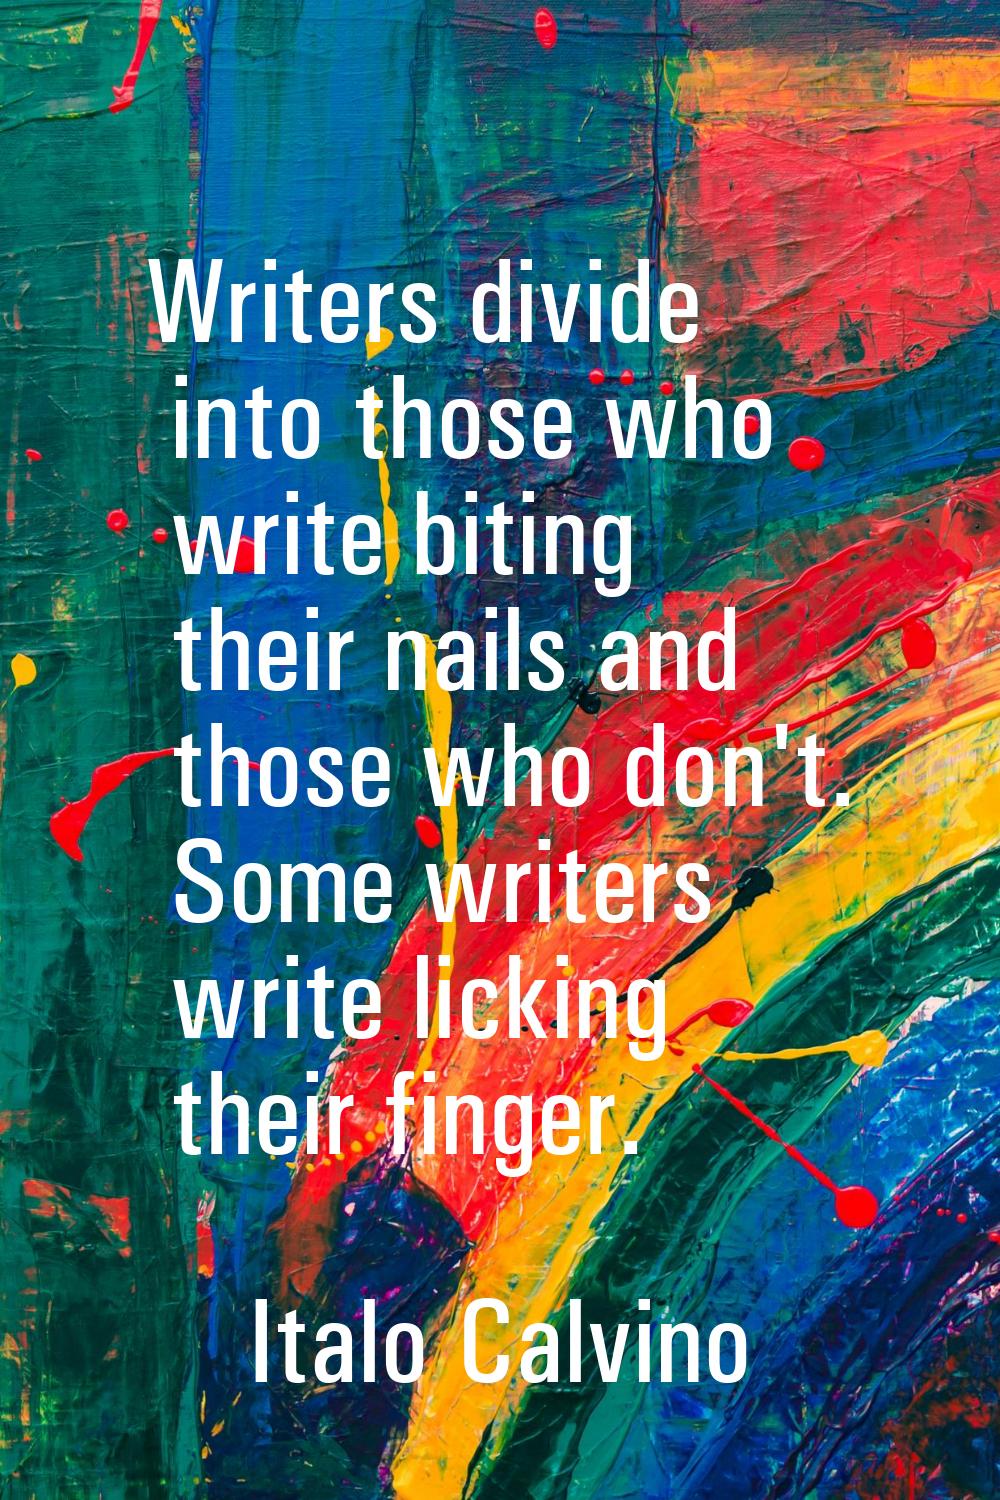 Writers divide into those who write biting their nails and those who don't. Some writers write lick